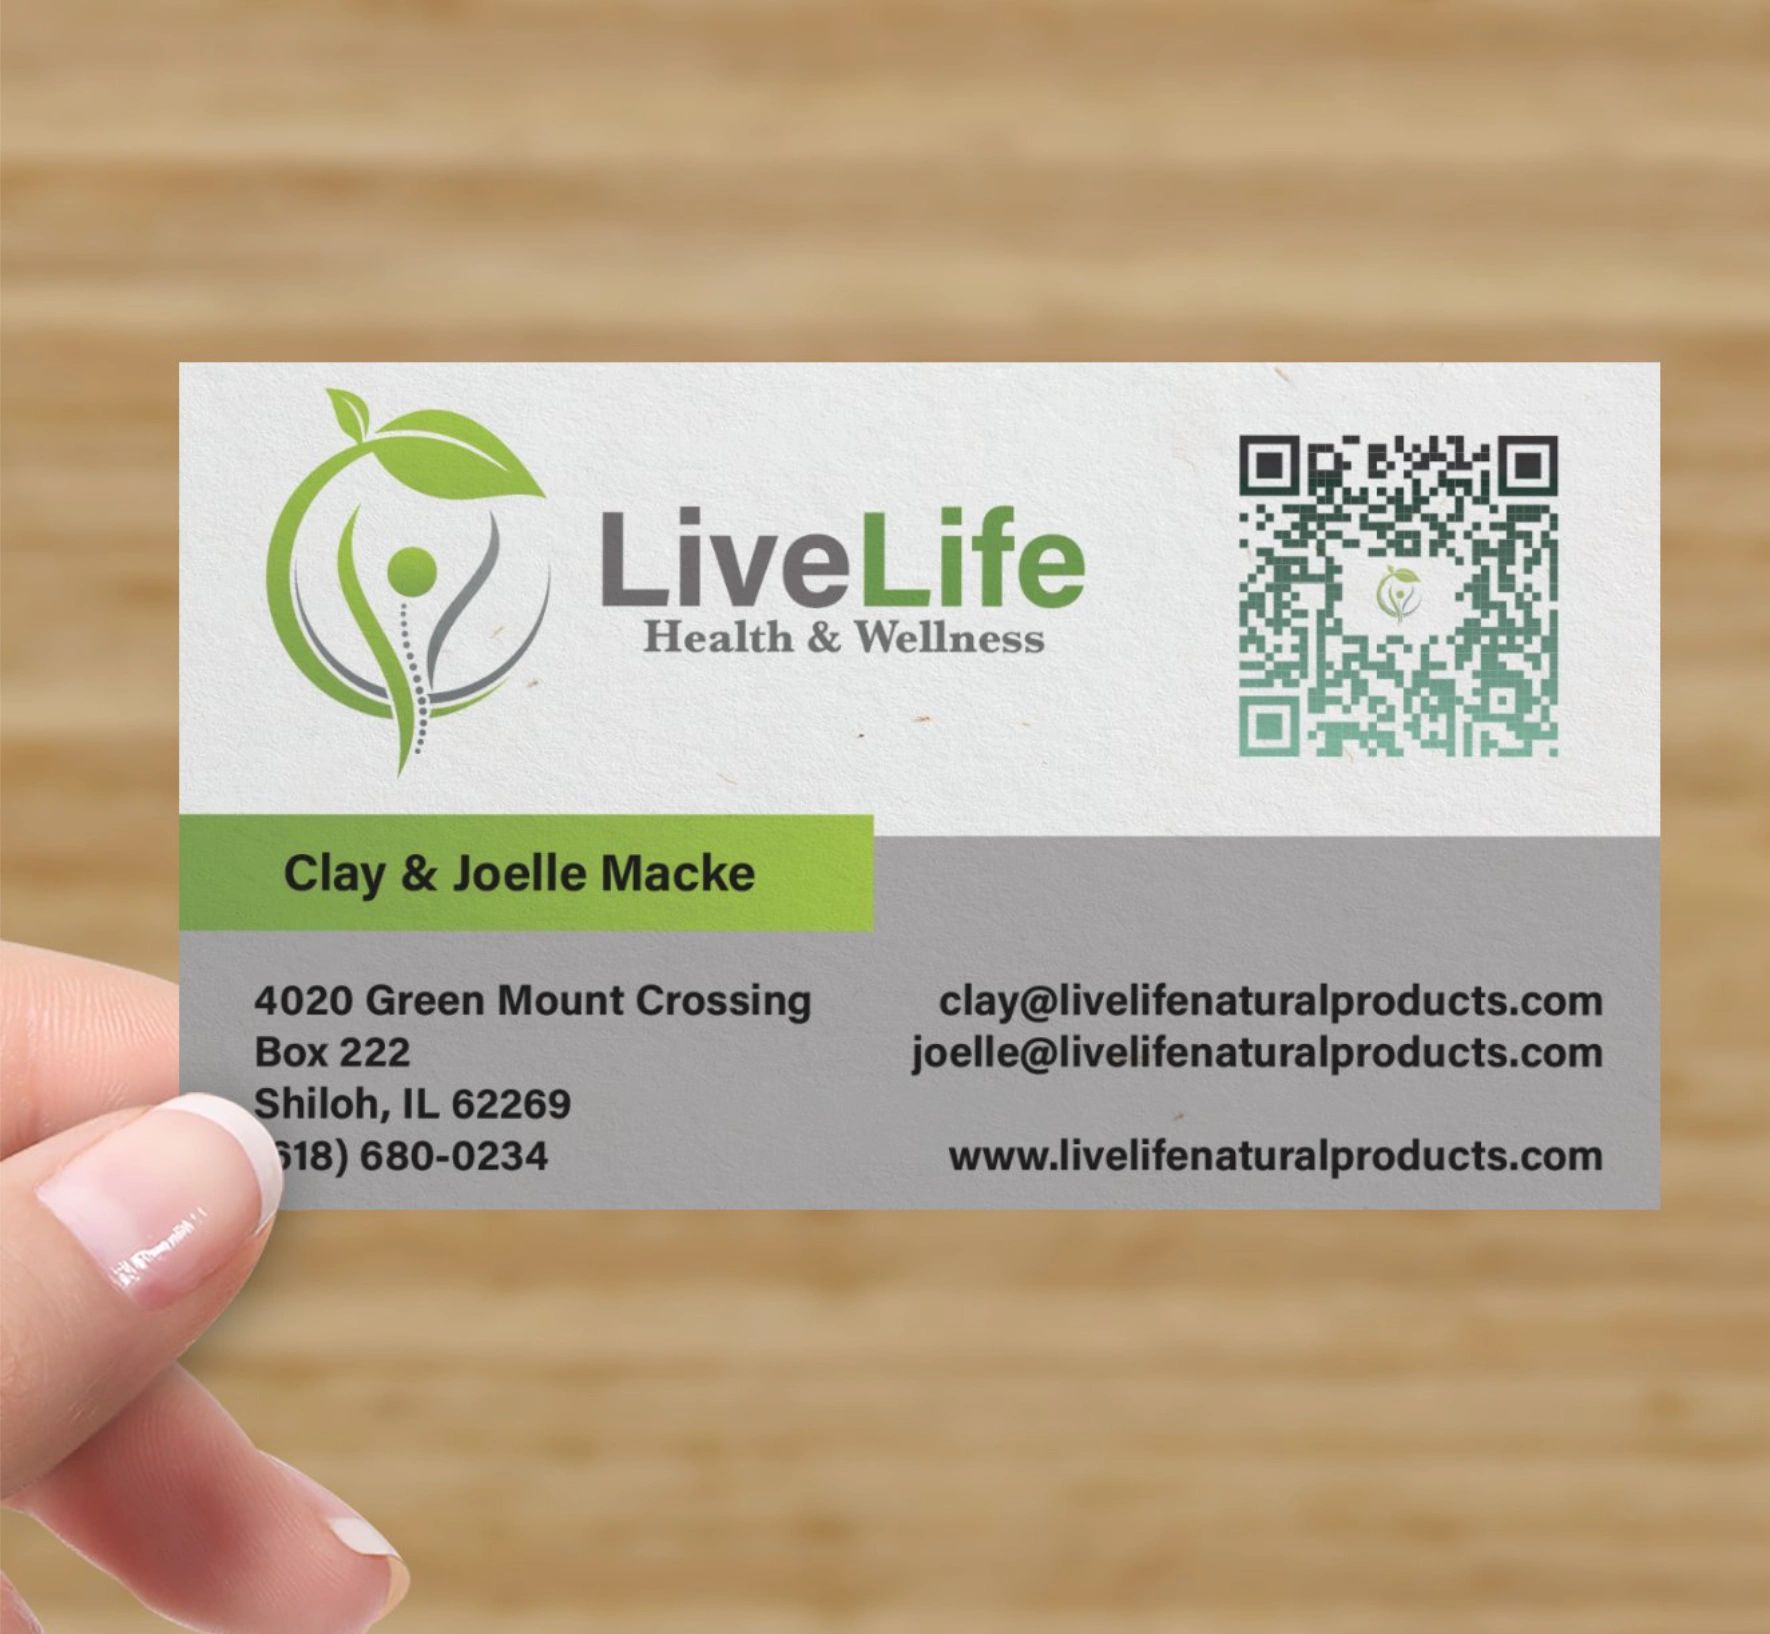 LiveLife Natural Products contact information